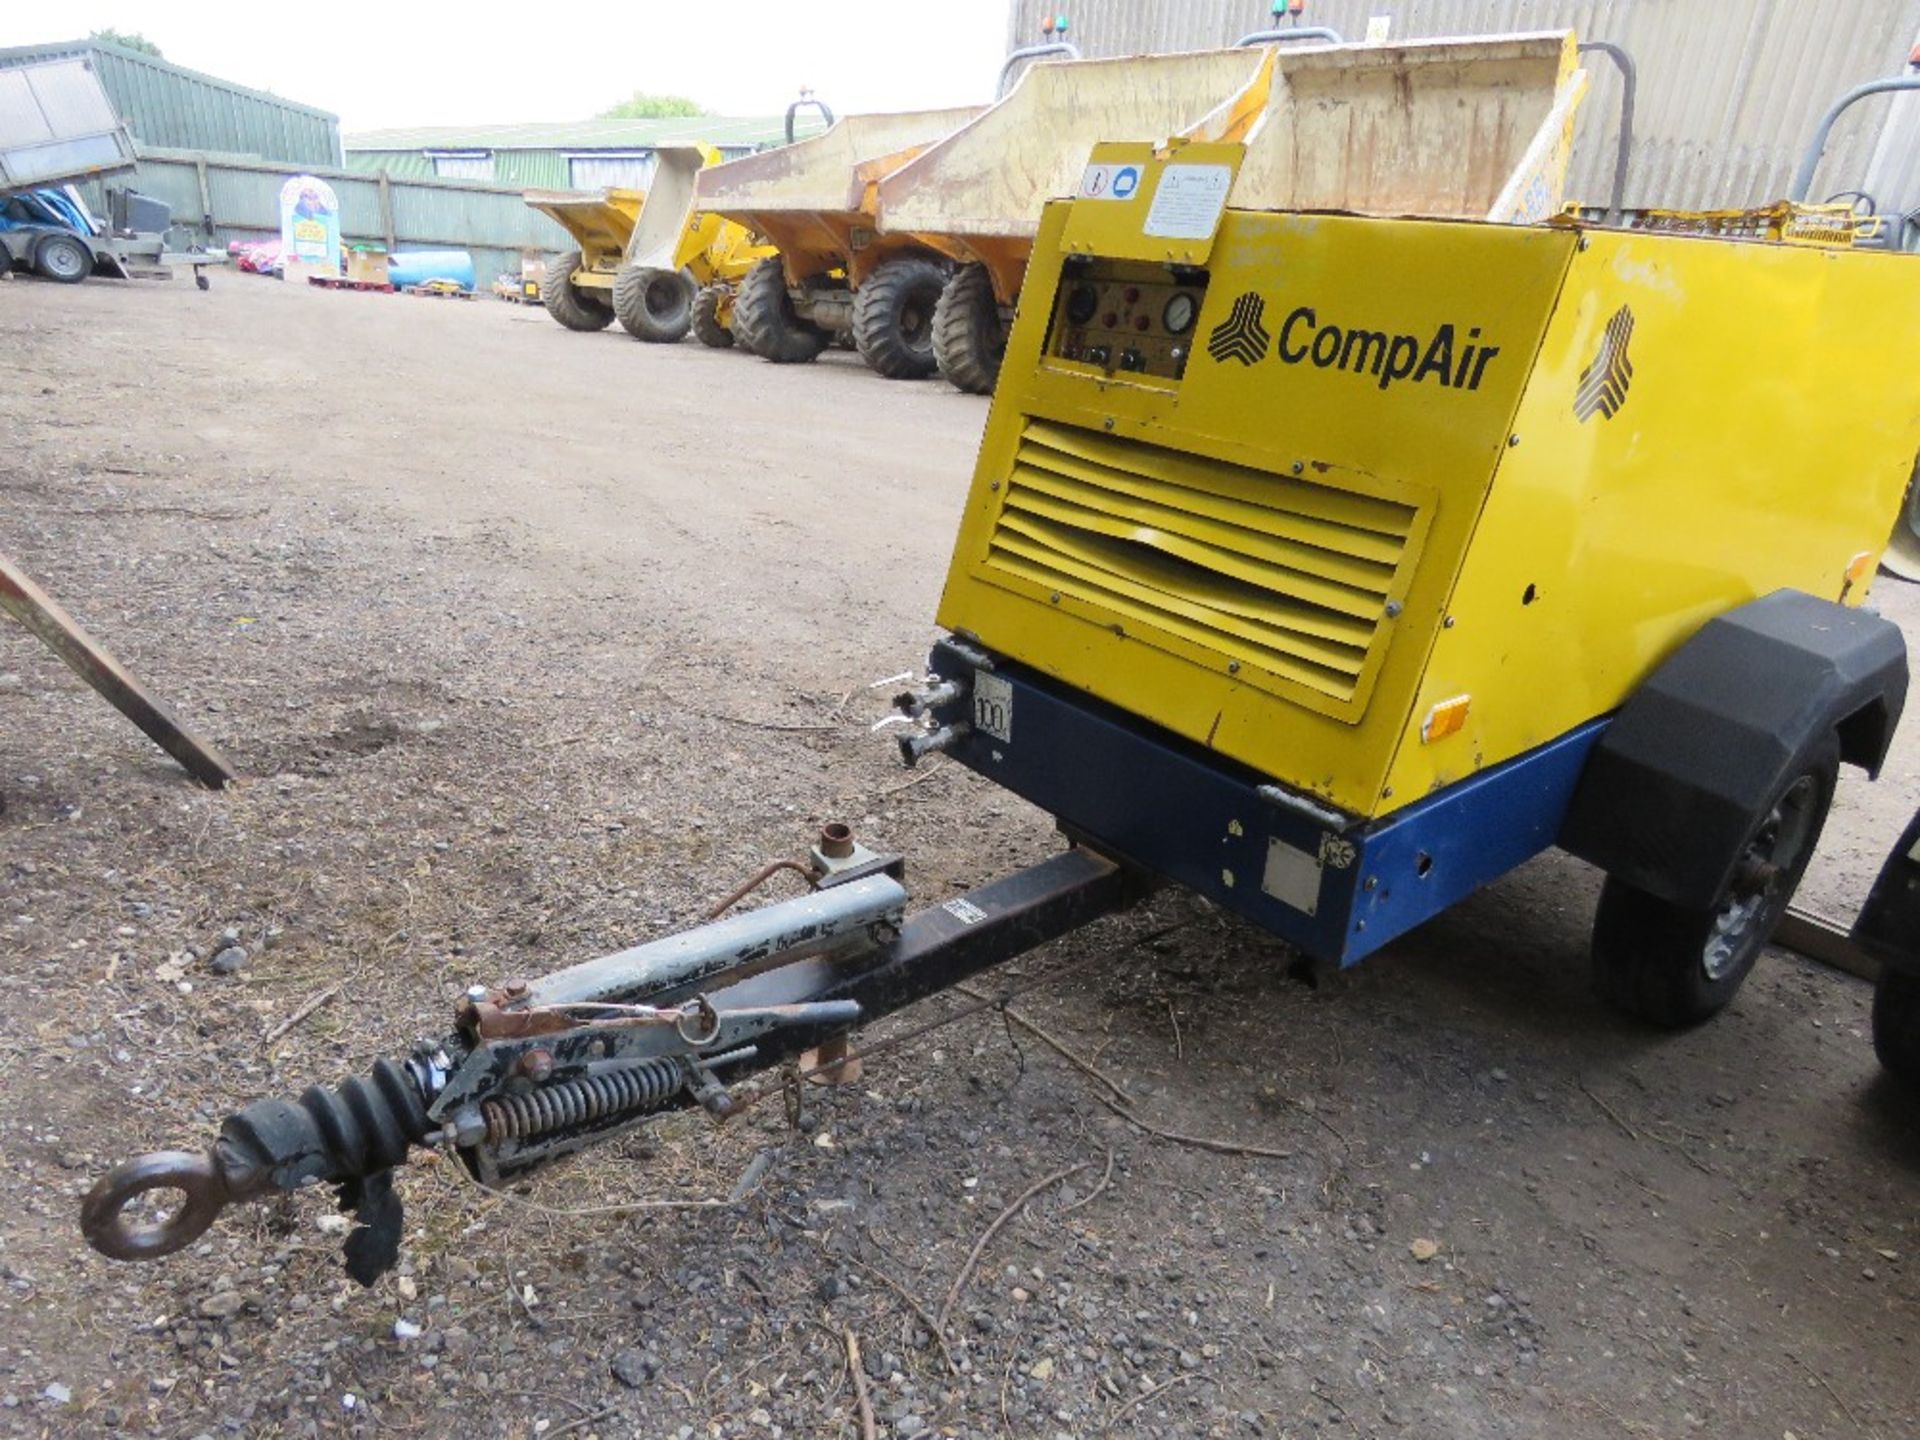 COMPAIR TOWED COMPRESSOR WITH DEUTZ ENGINE. WHEN TESTED WAS SEEN TO RUN AND MAKE AIR. - Image 2 of 5